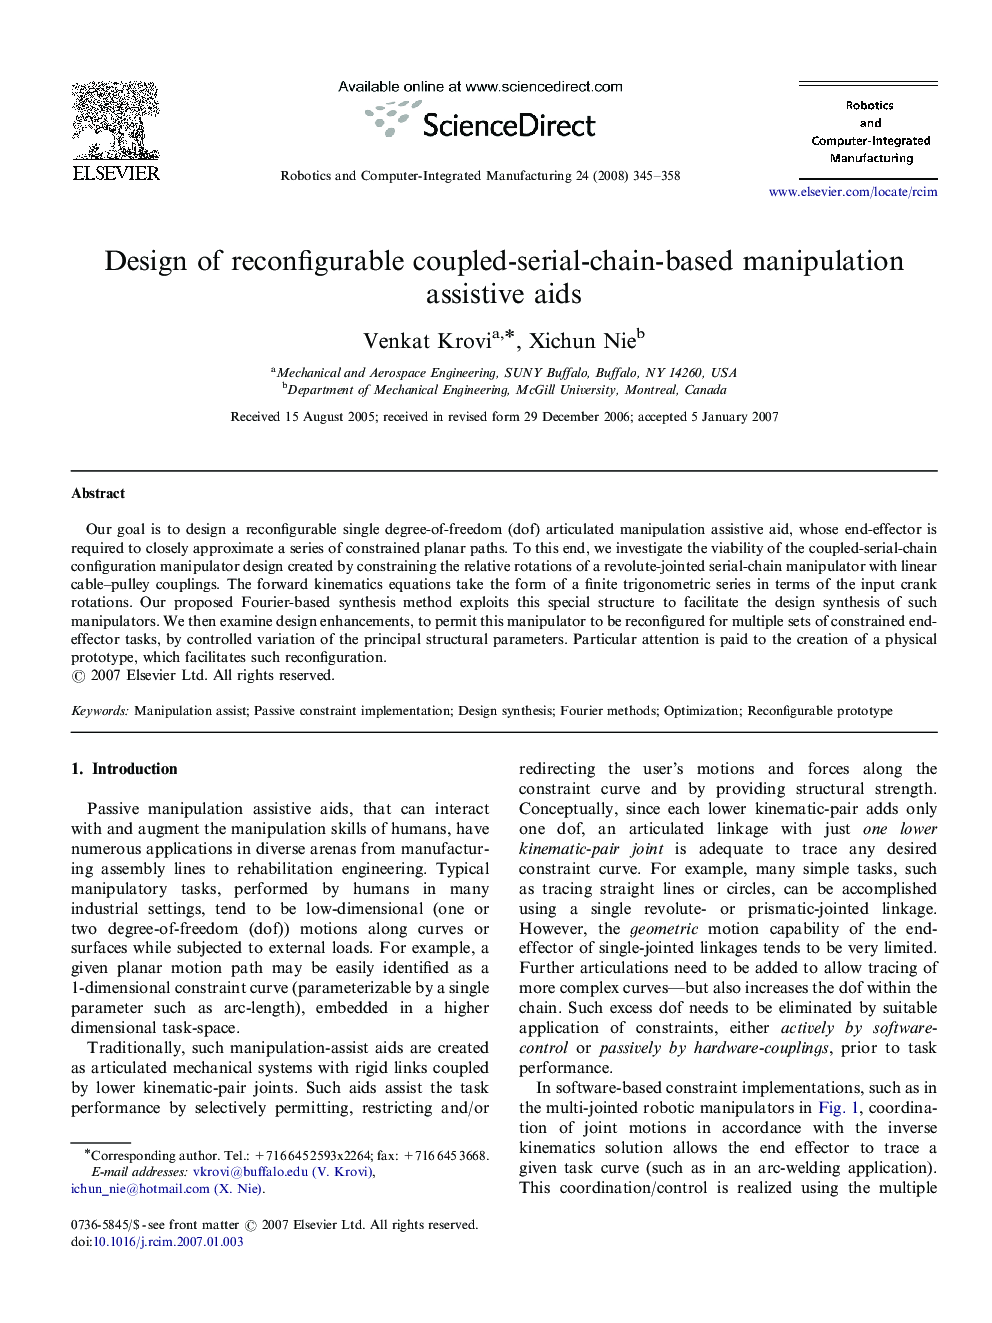 Design of reconfigurable coupled-serial-chain-based manipulation assistive aids